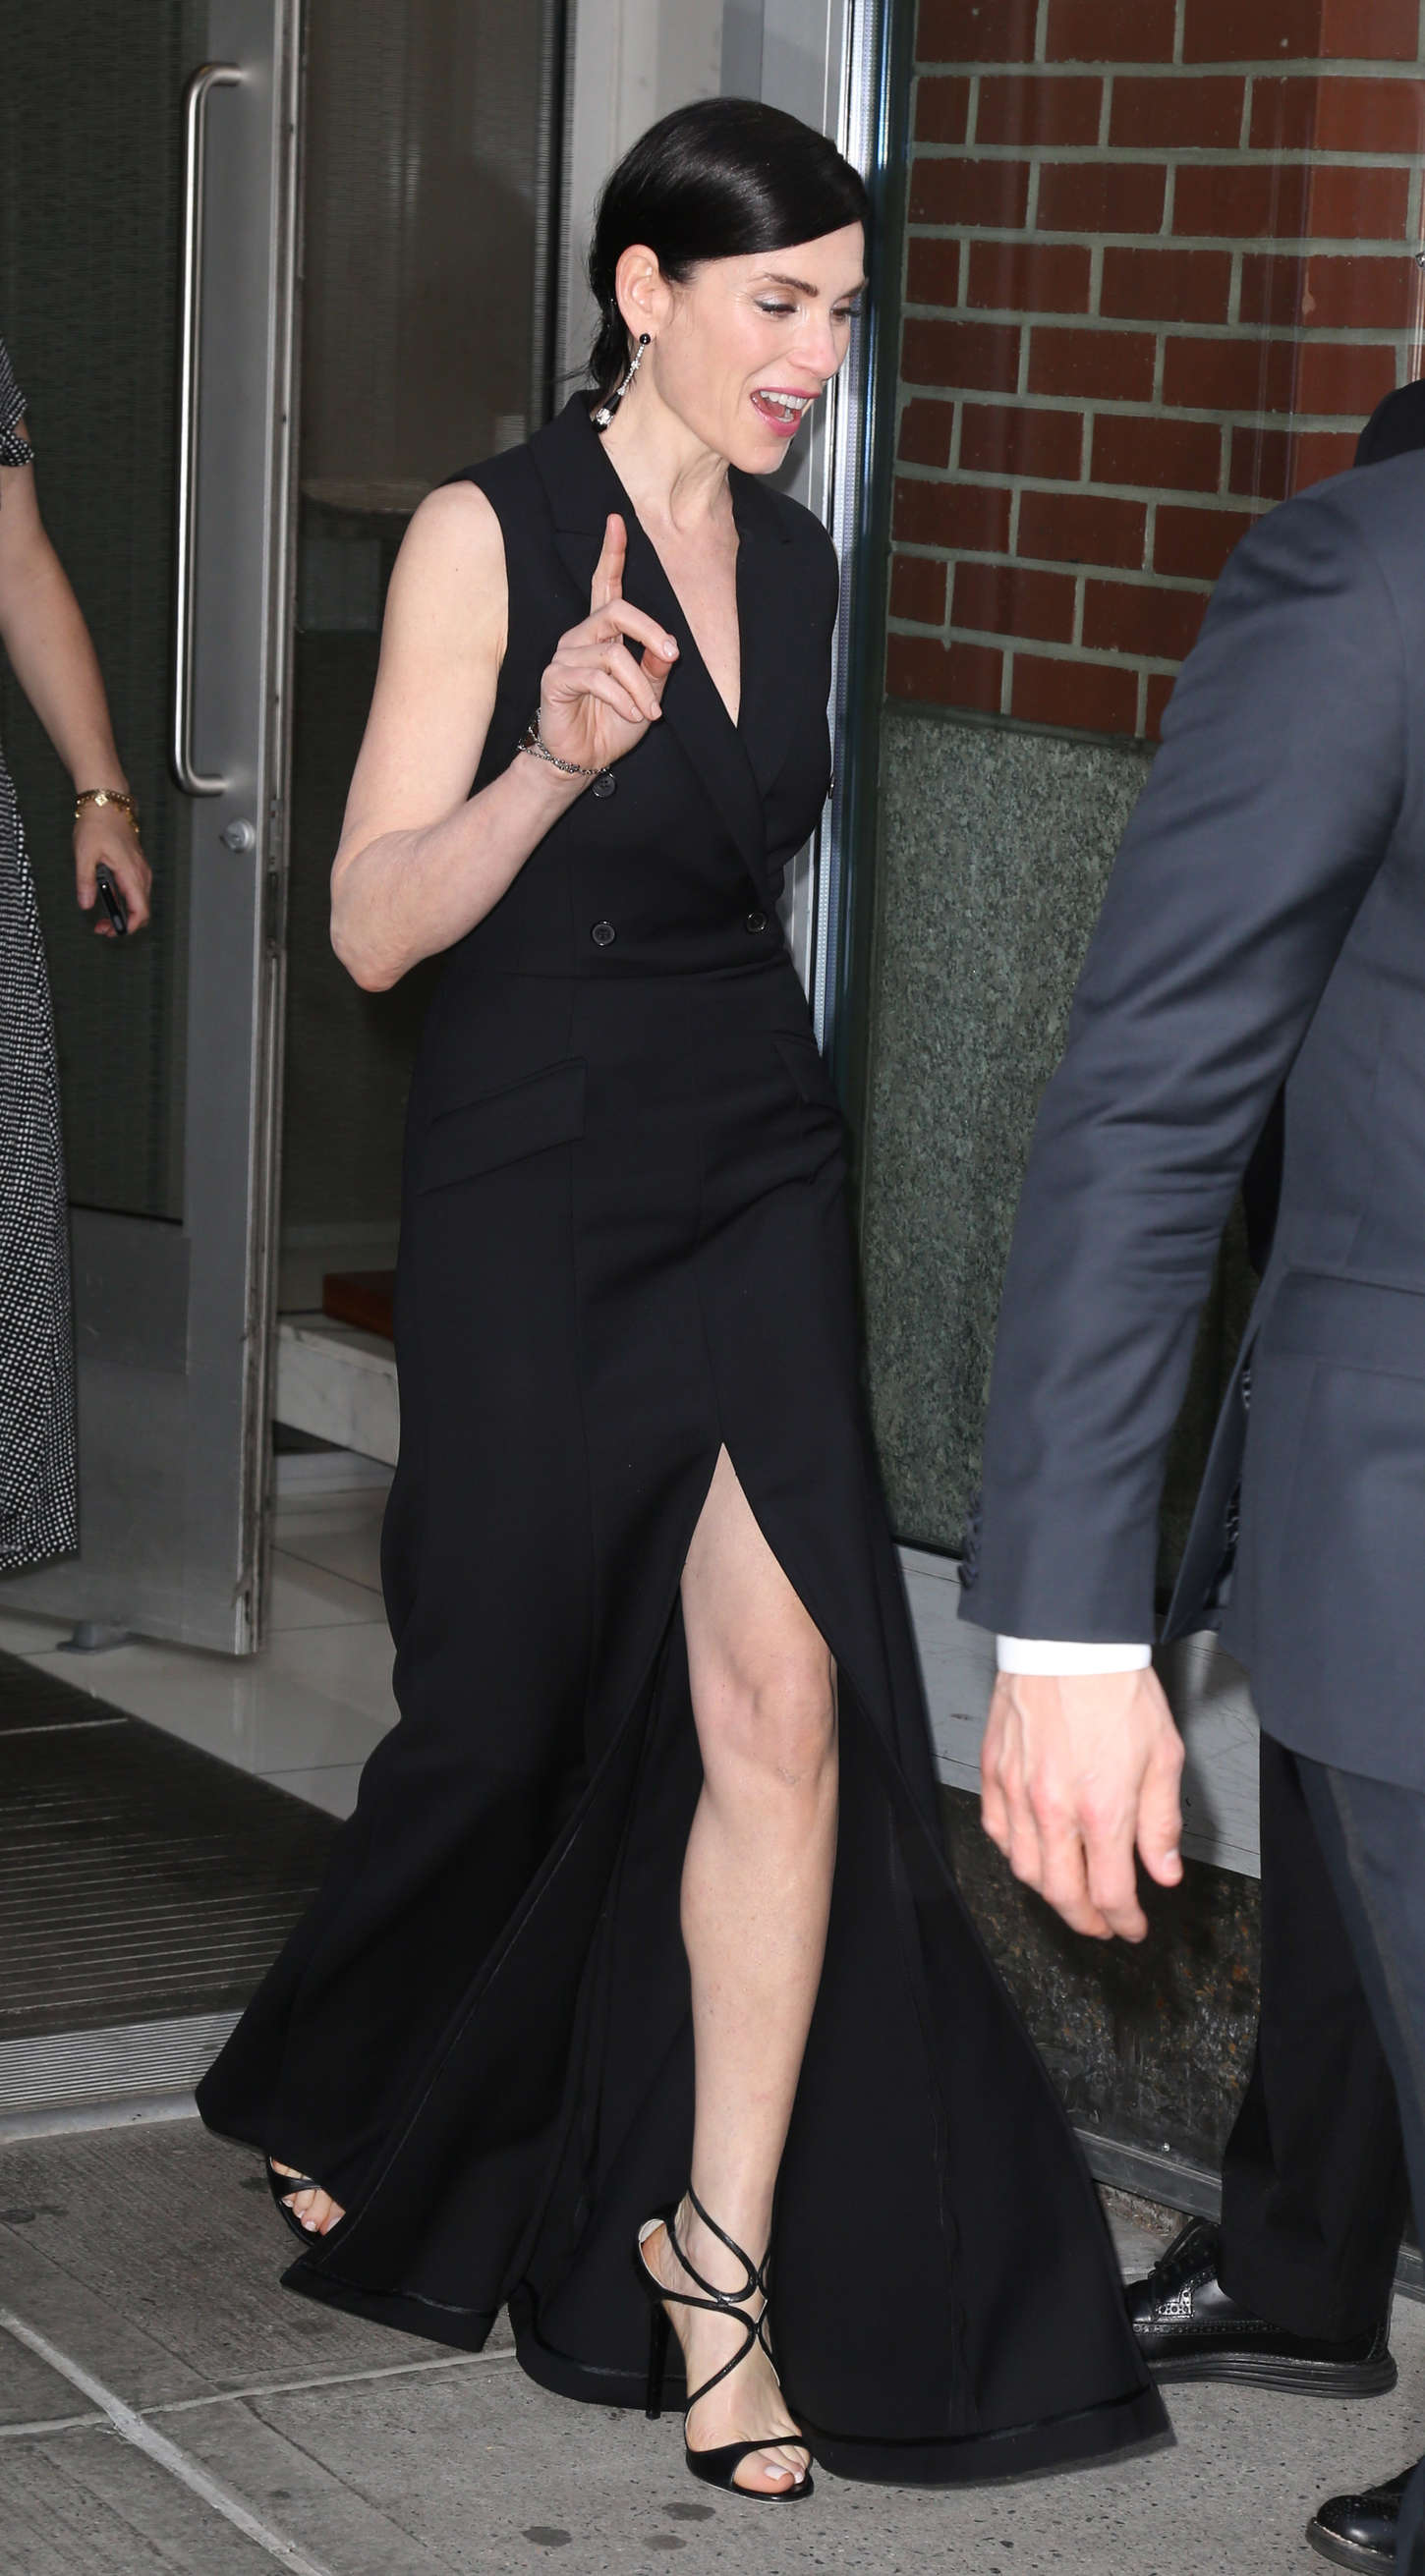 Julianna Margulies - Leaving her apartment in NYC. 